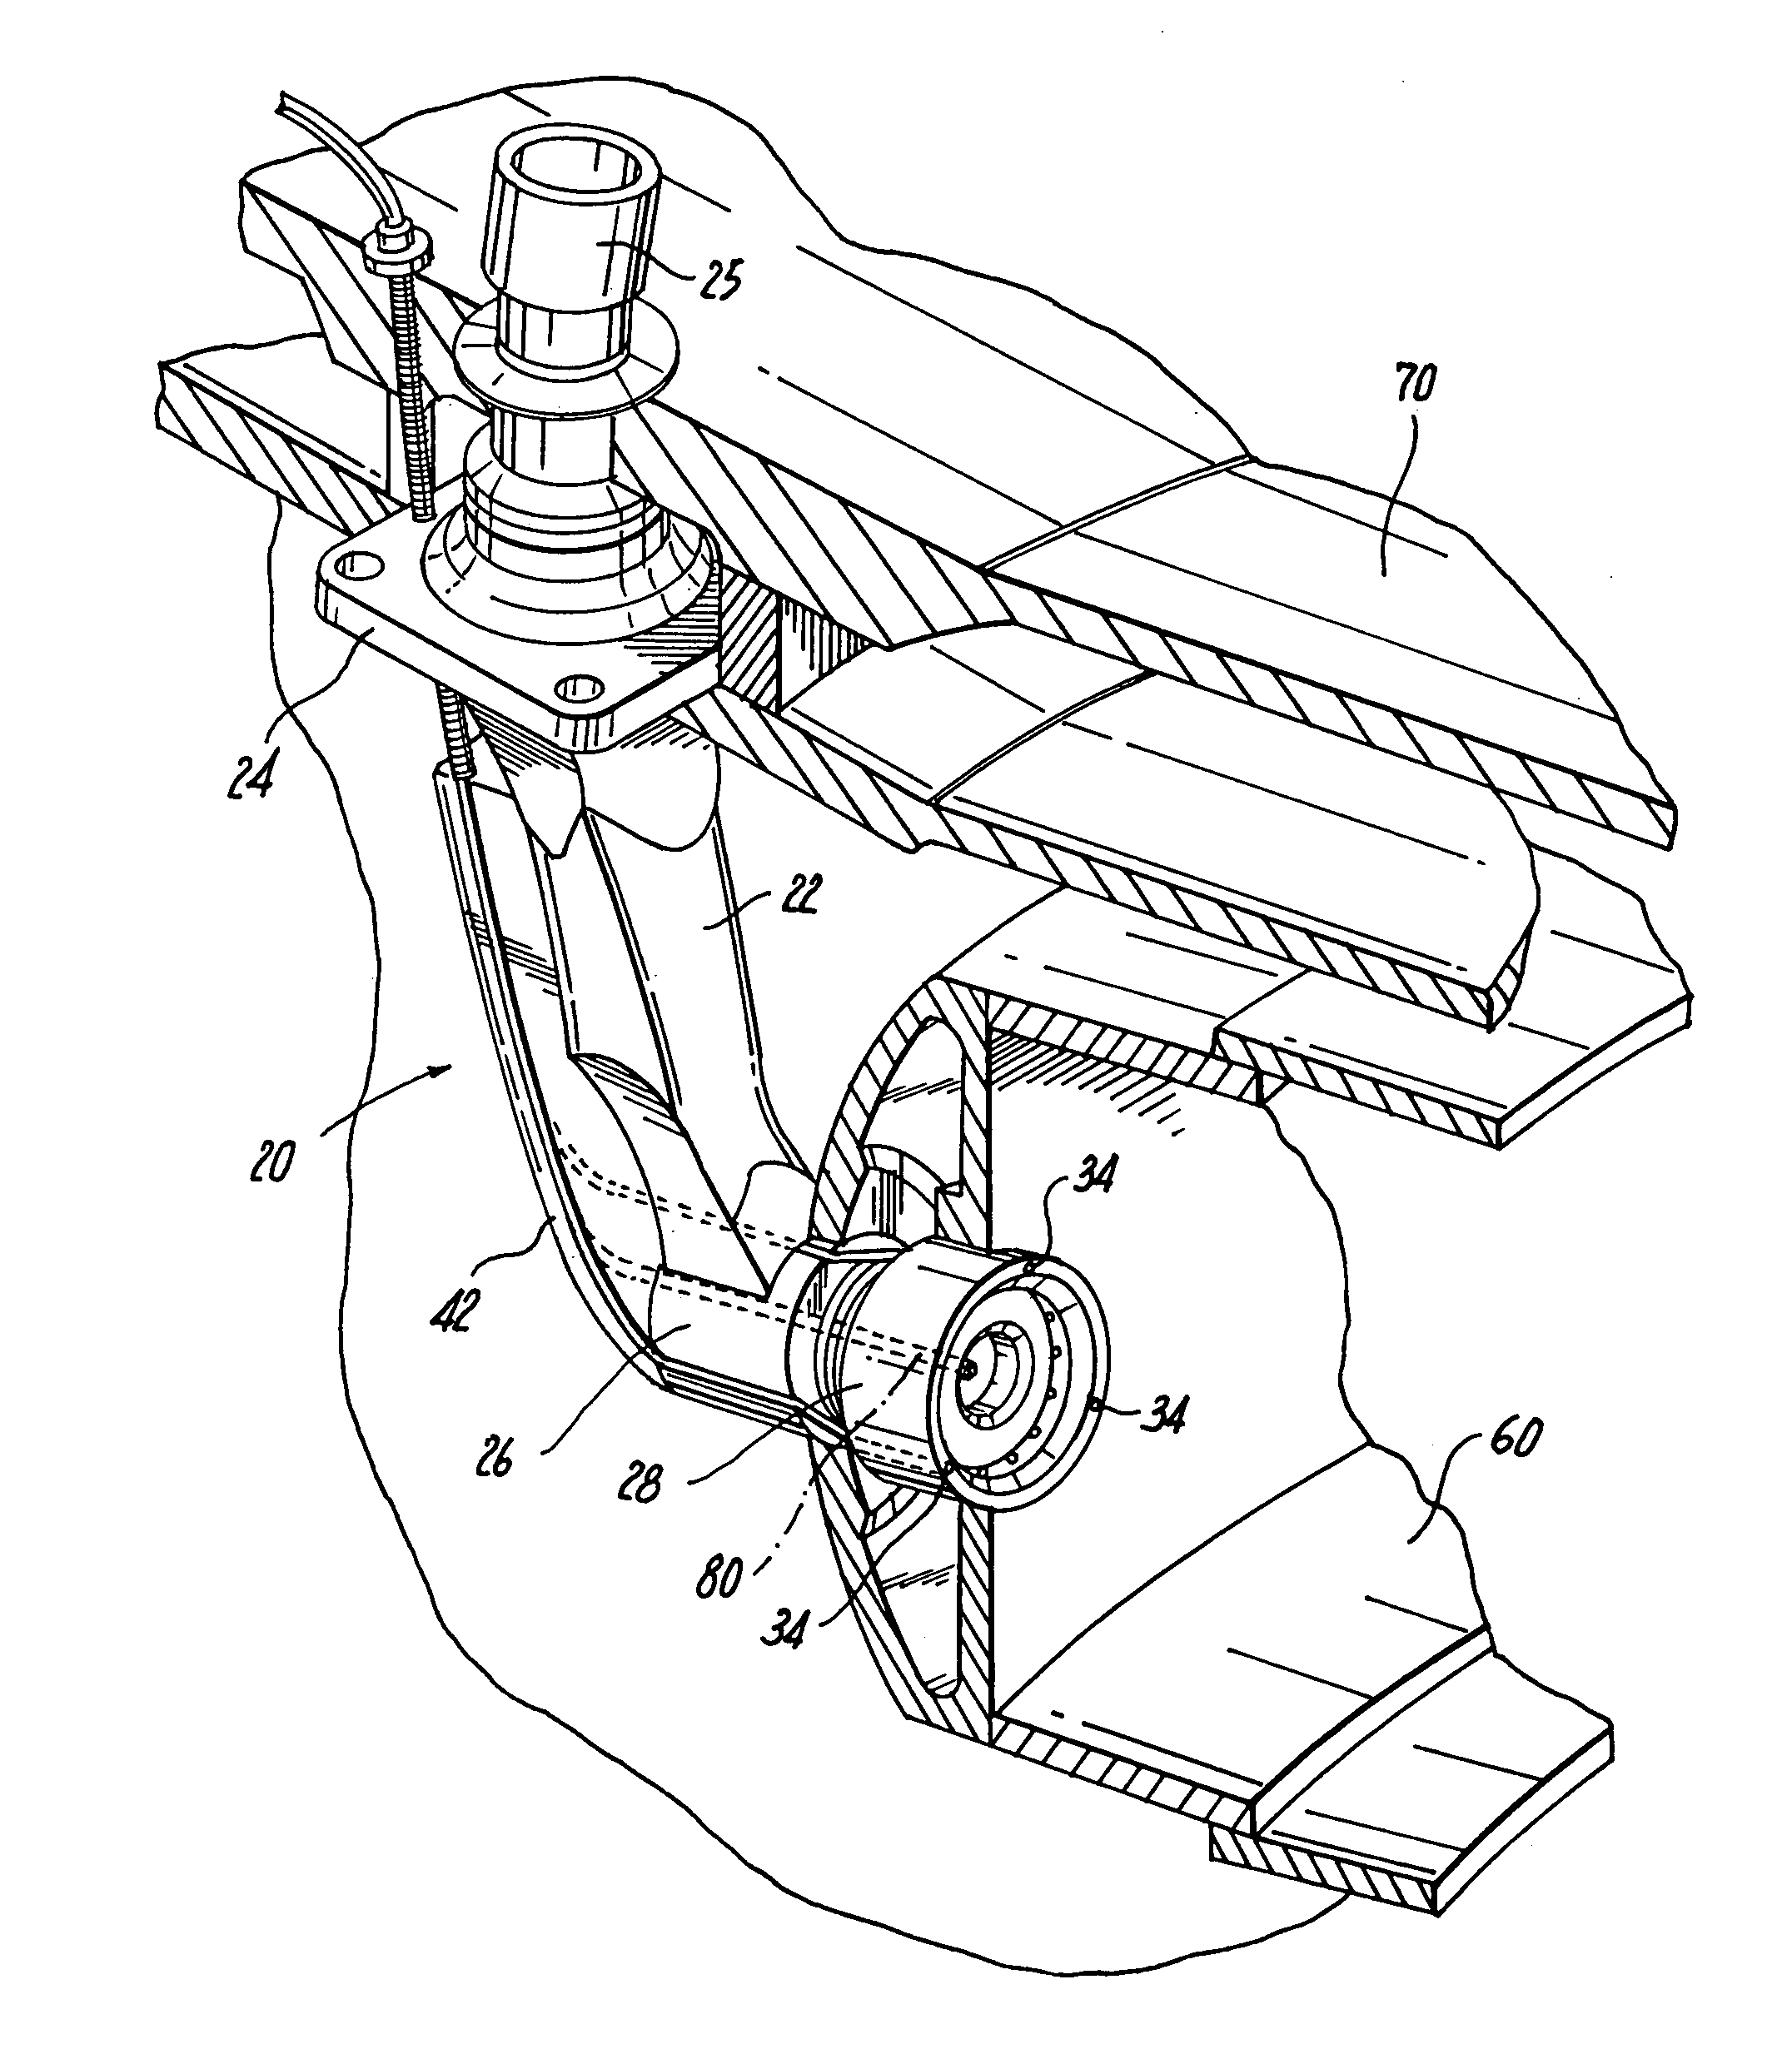 Apparatus, system and method for observing combustion conditions in a gas turbine engine